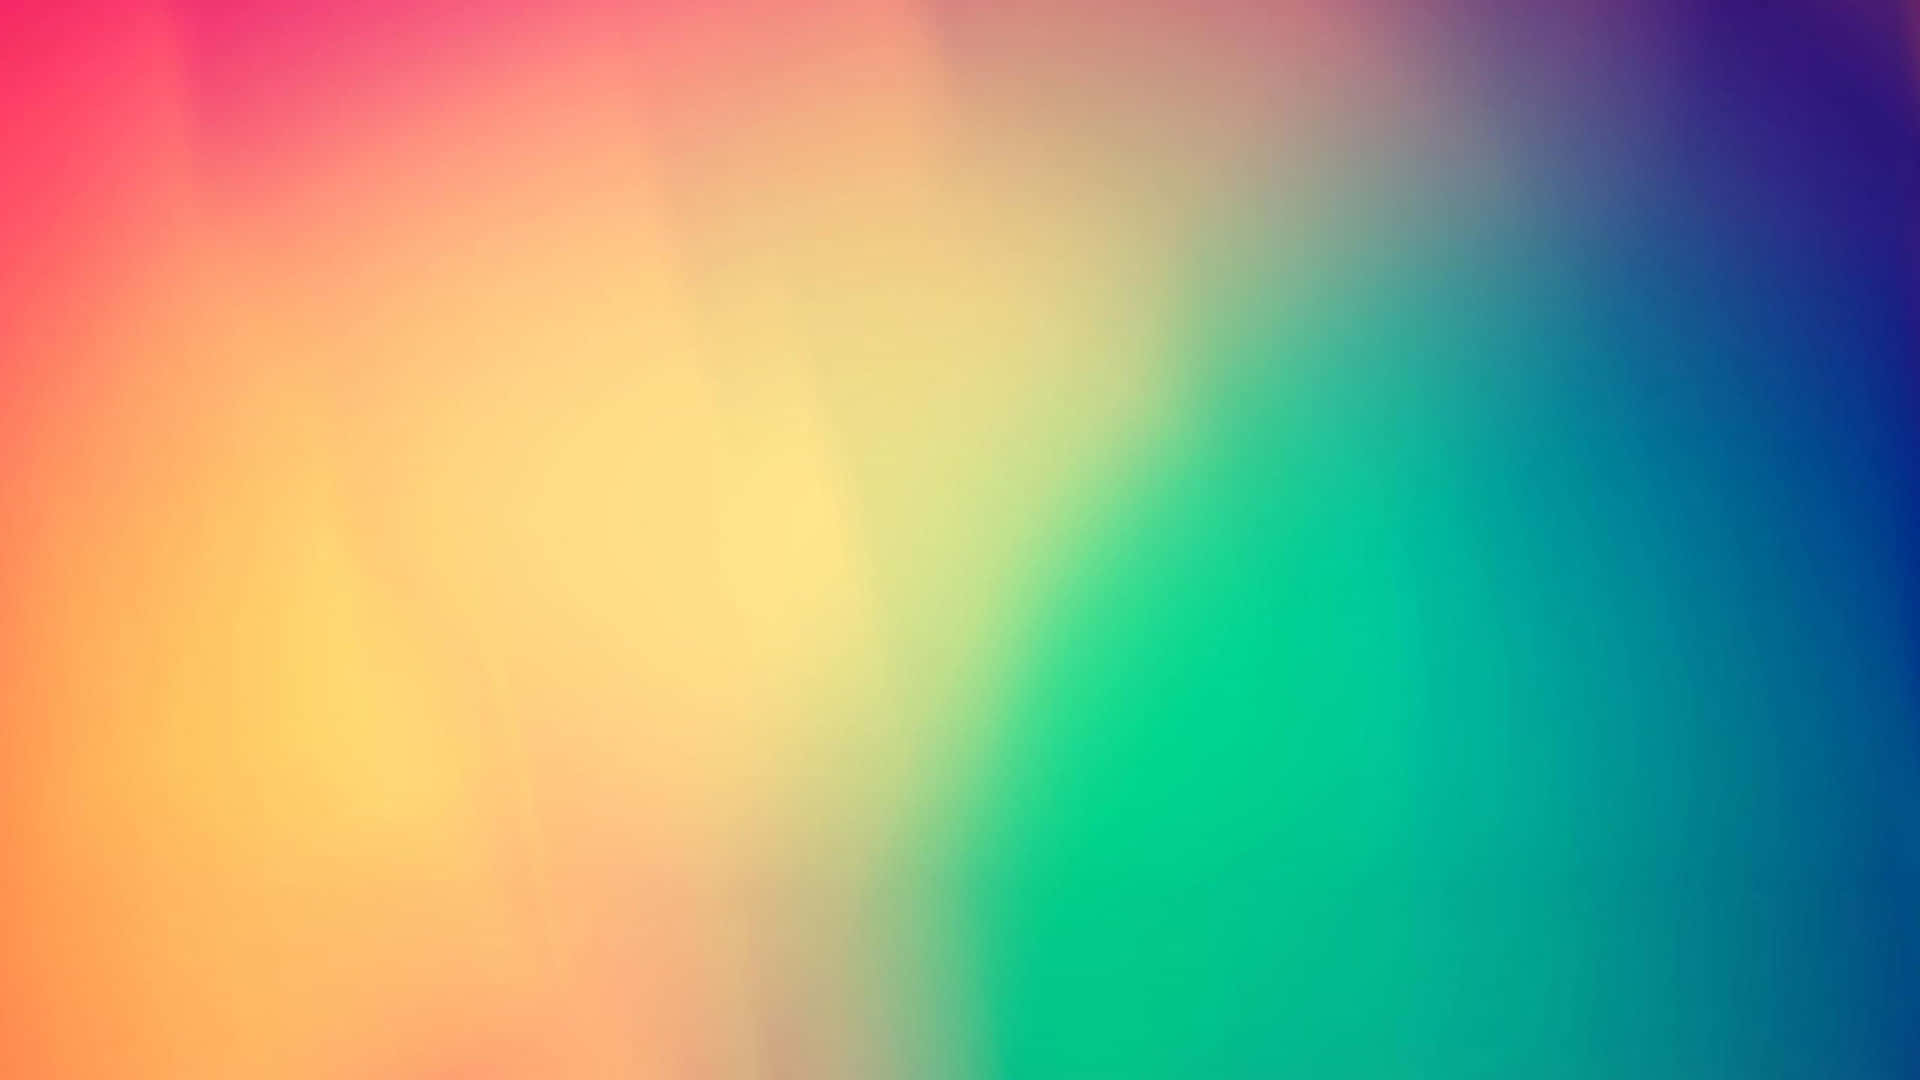 a colorful abstract background with a rainbow color